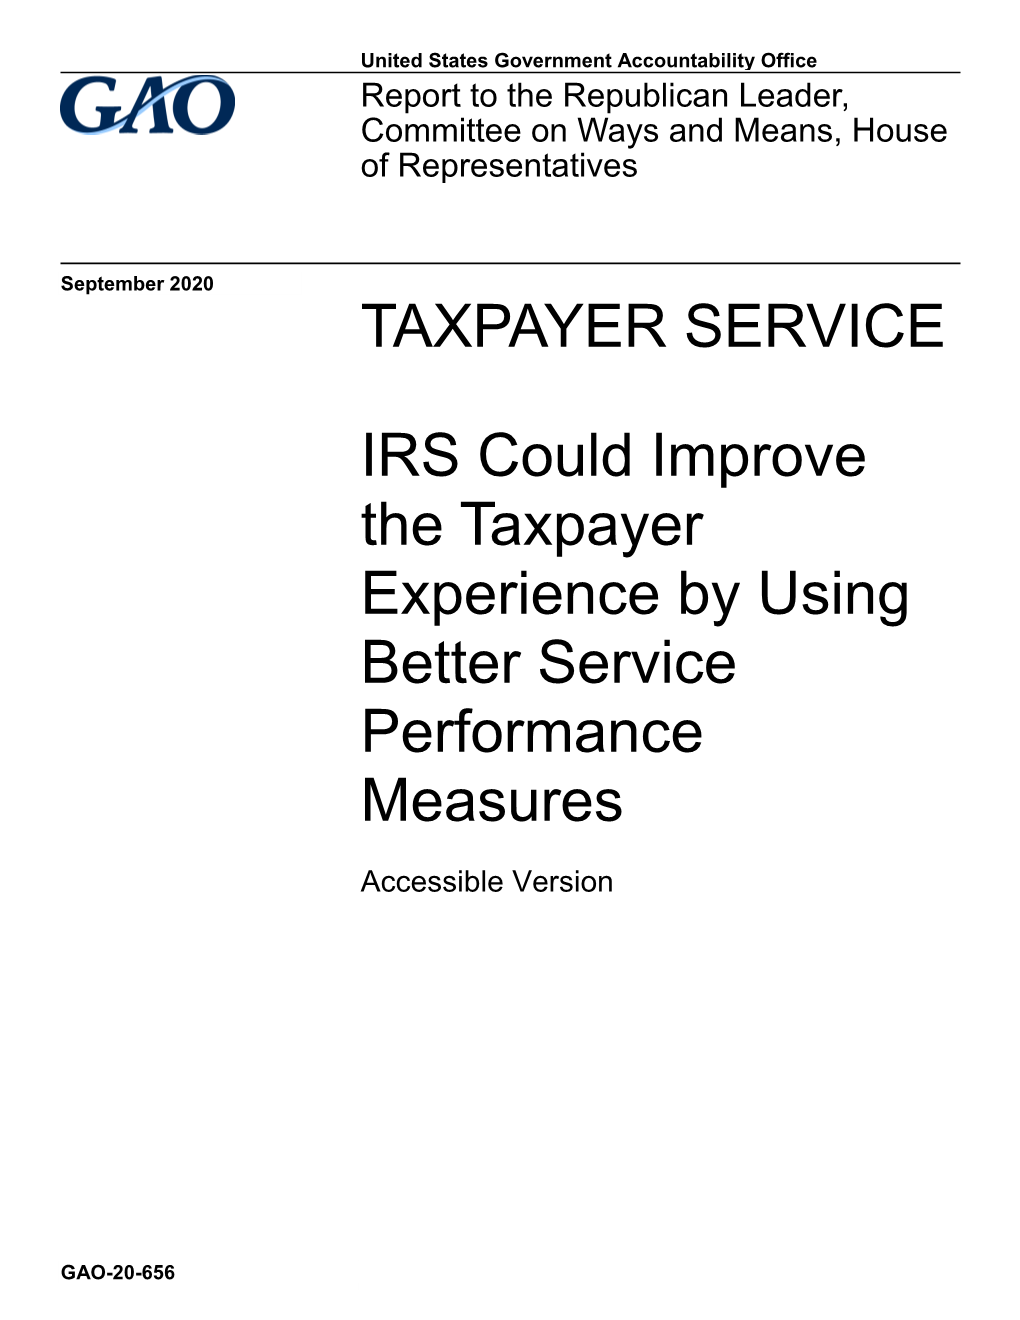 IRS Could Improve the Taxpayer Experience by Using Better Service Performance Measures